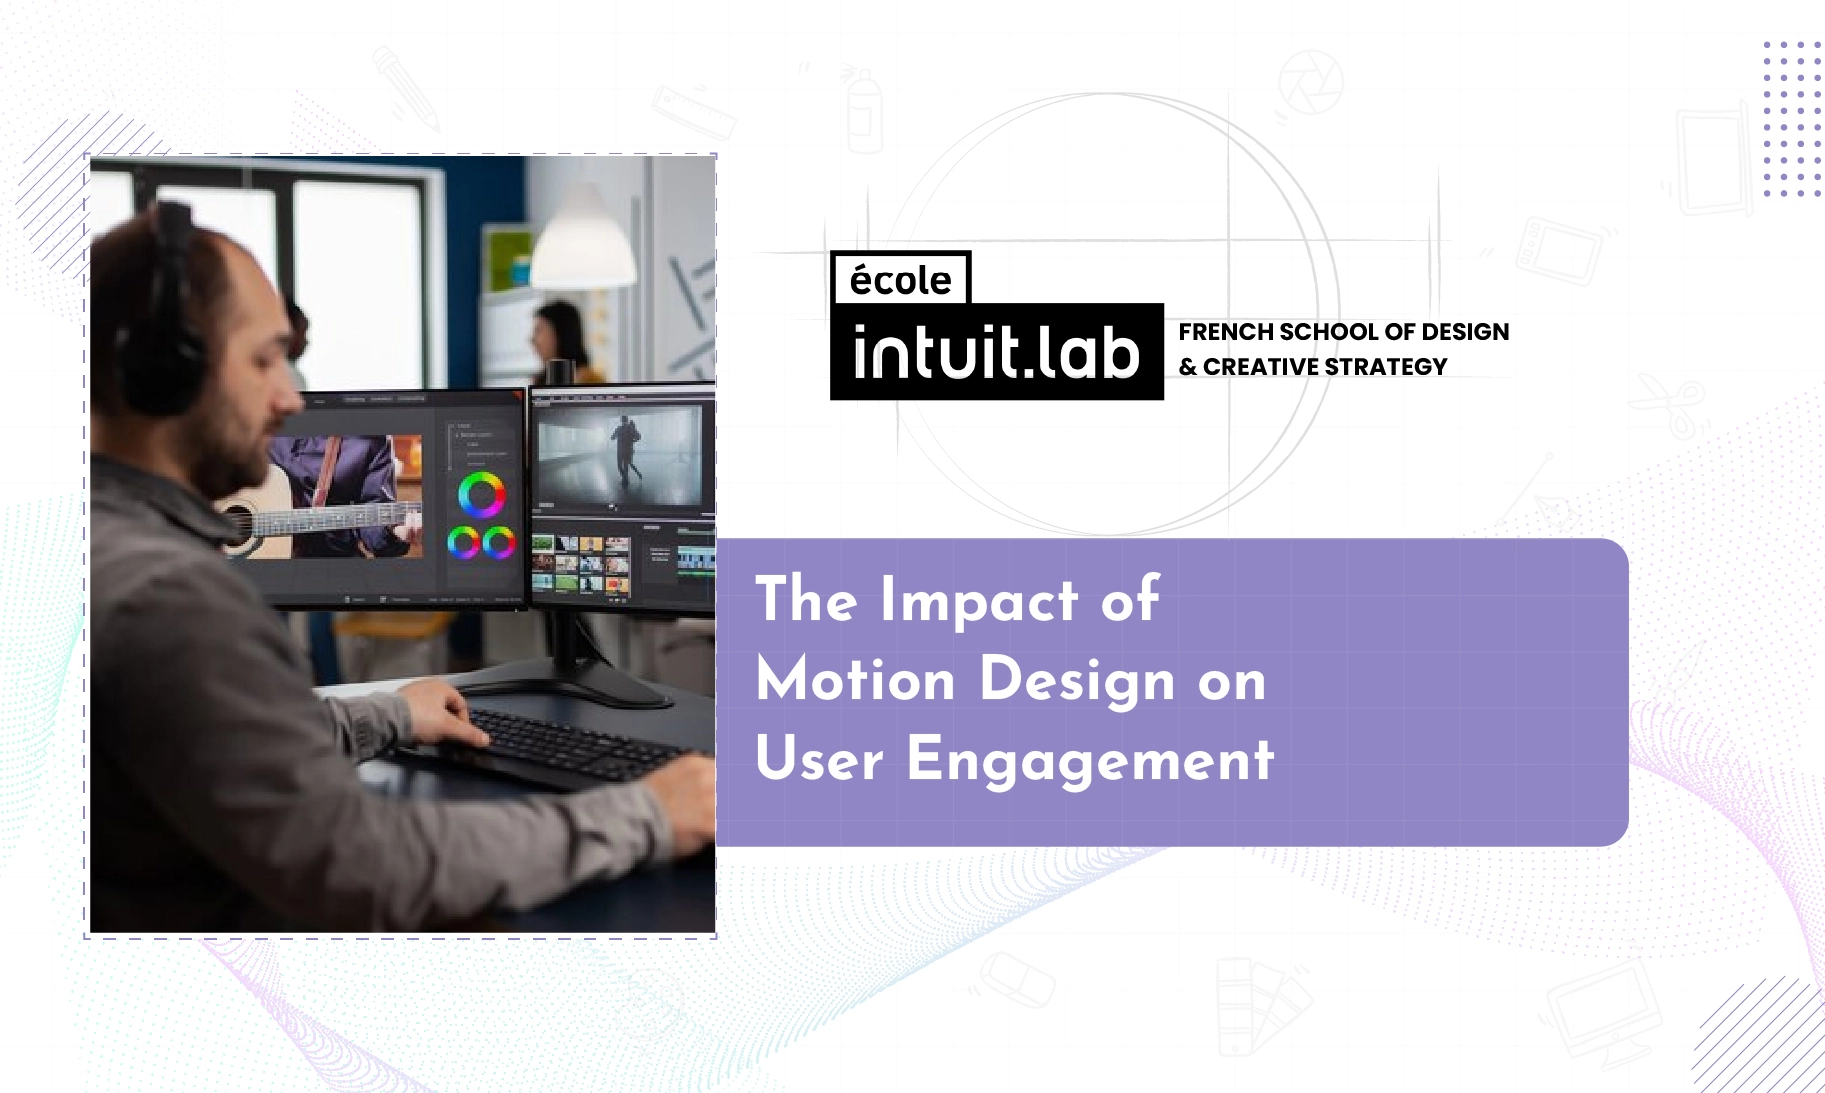 The Impact of Motion Design on User Engagement